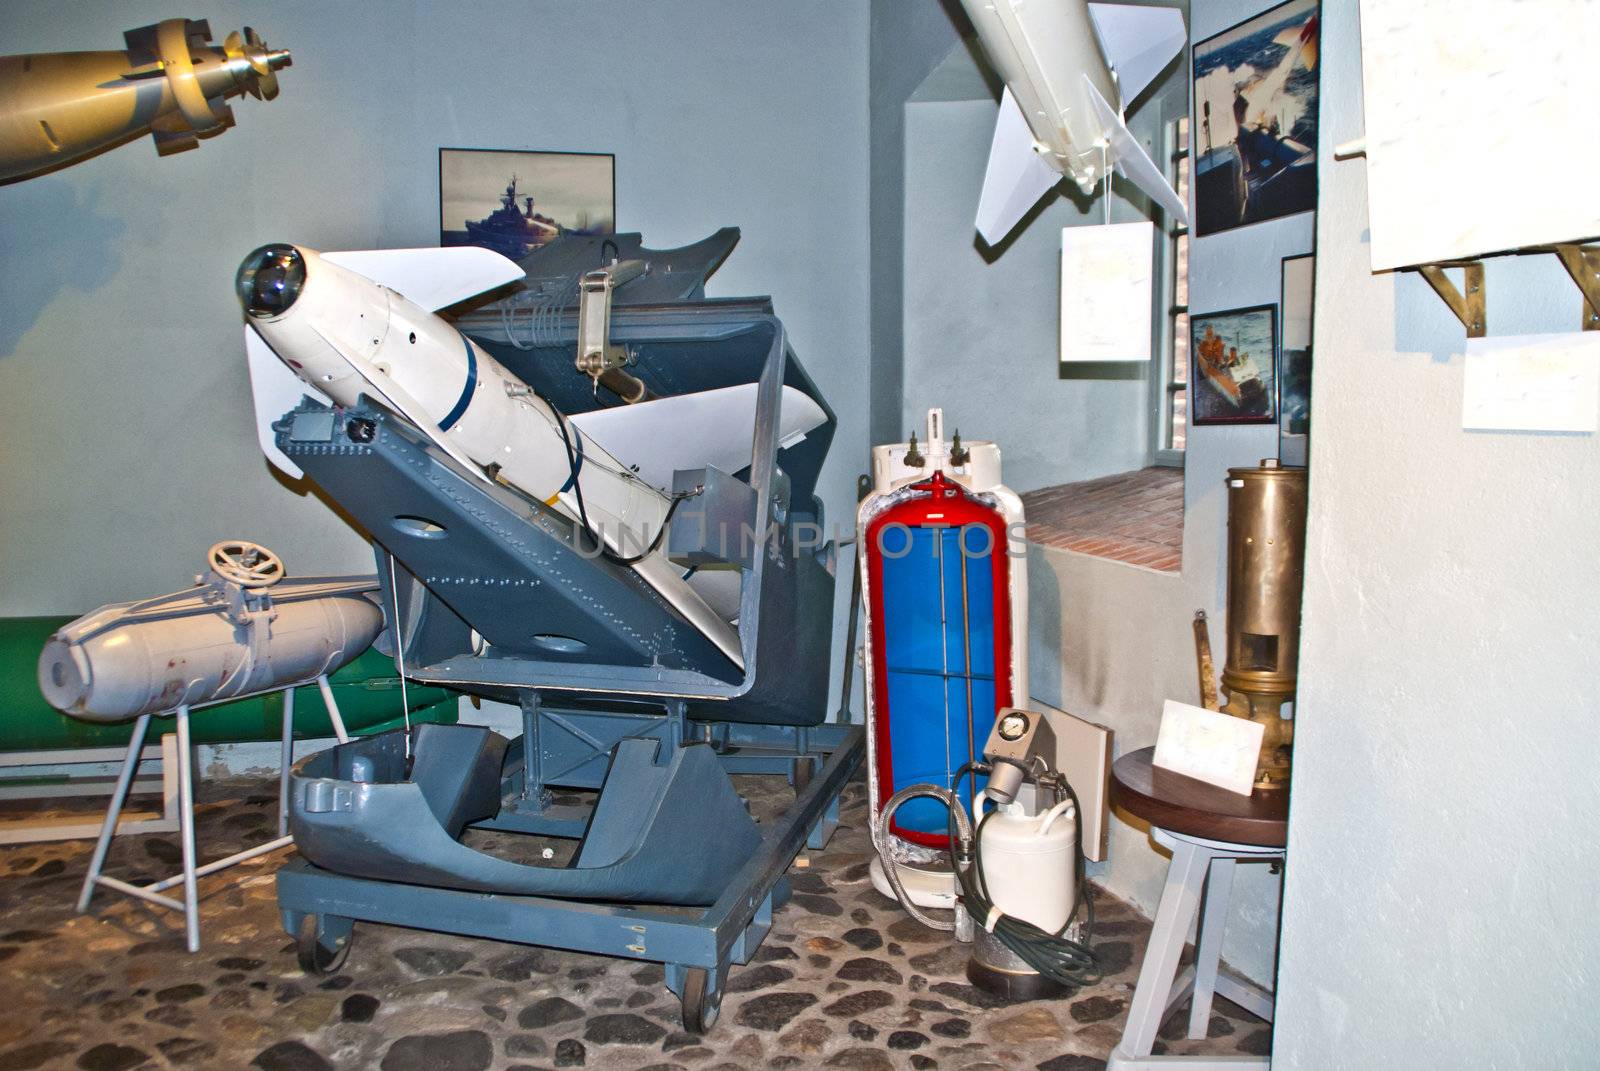 in museum, penguin (missile) by steirus